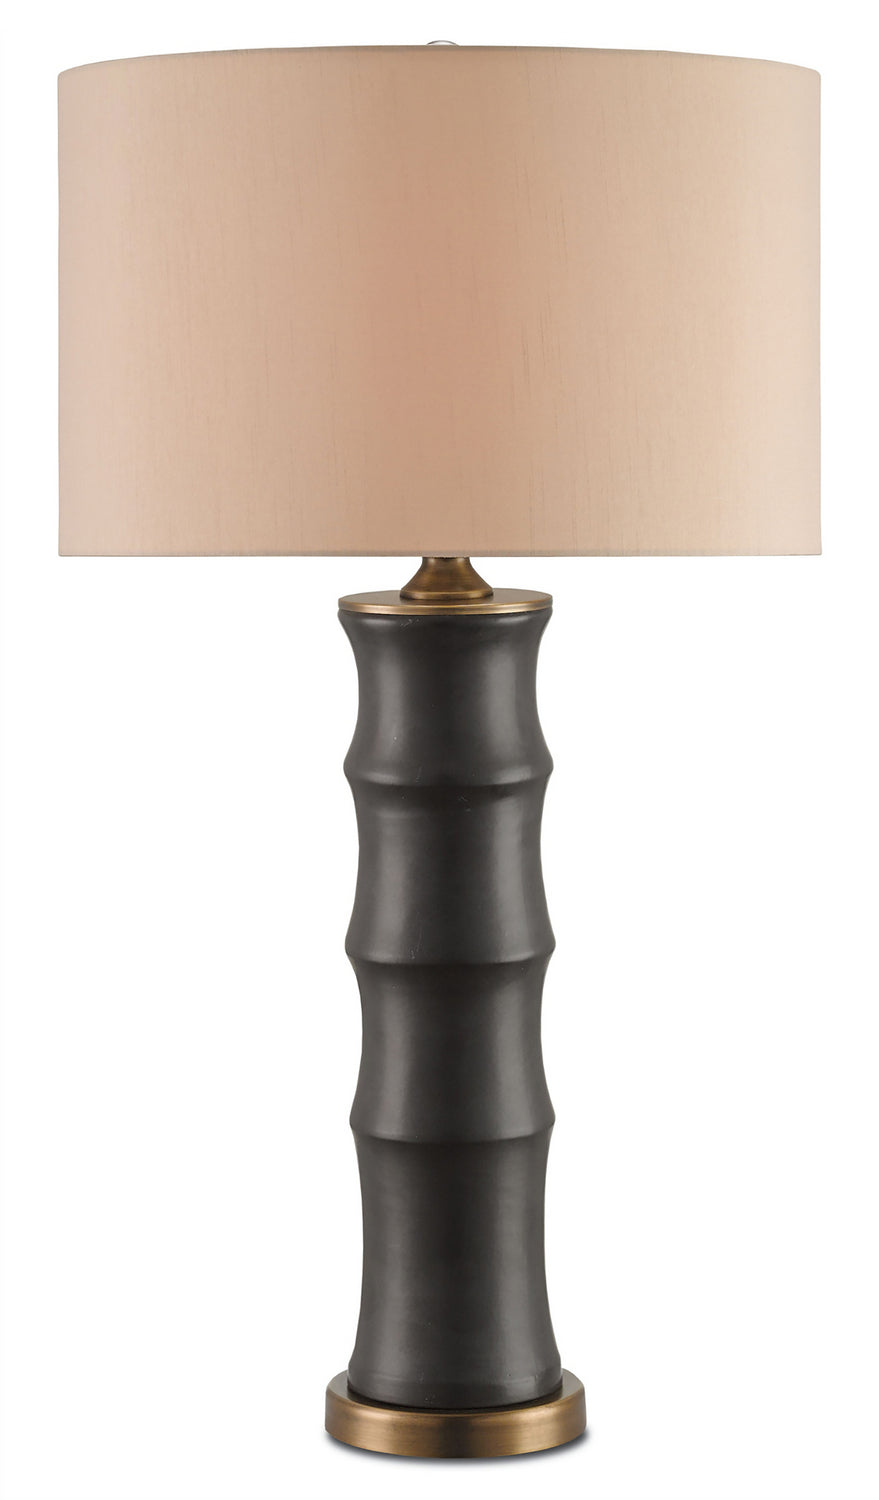 One Light Table Lamp from the Roark collection in Matte Black/Antique Brass finish